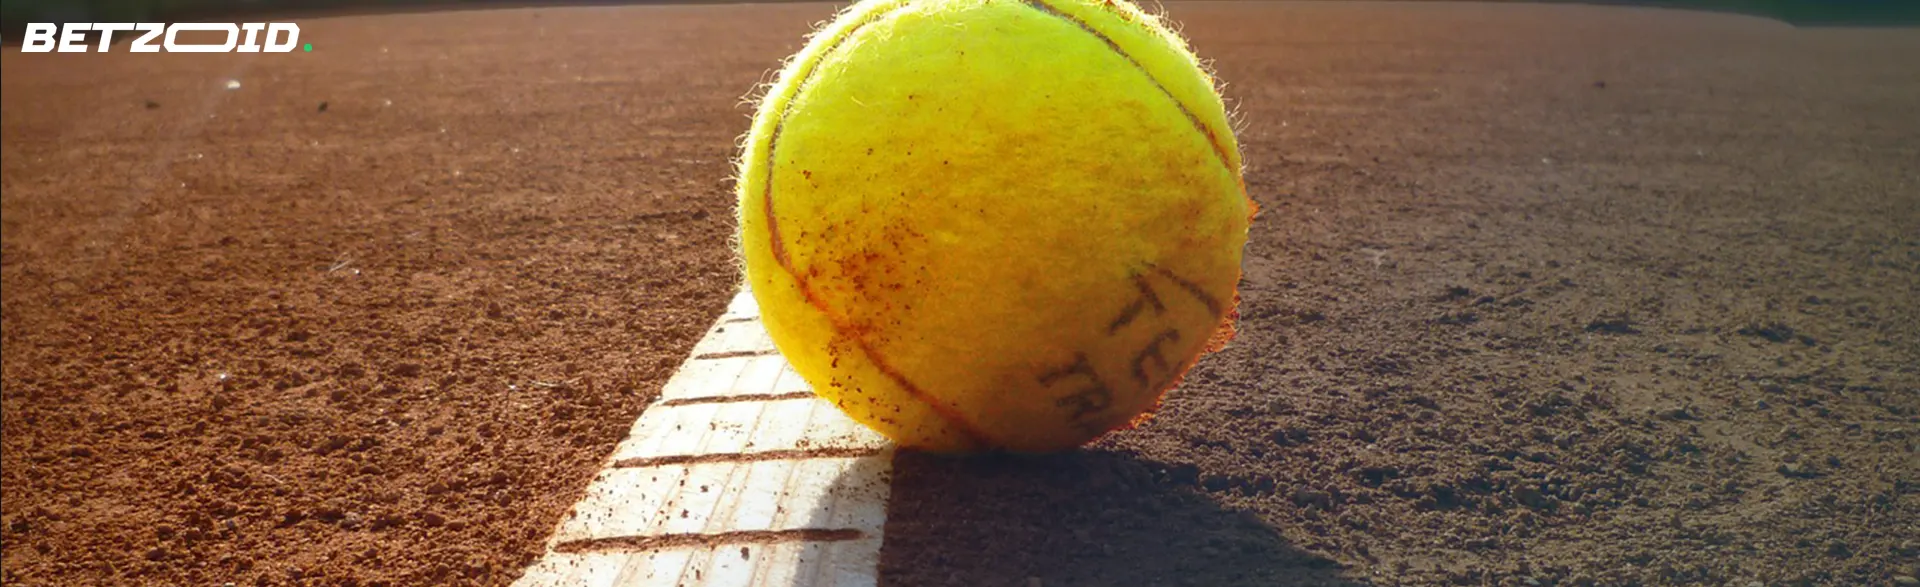 Close-up of tennis ball on a clay court, resting on the white boundary line.